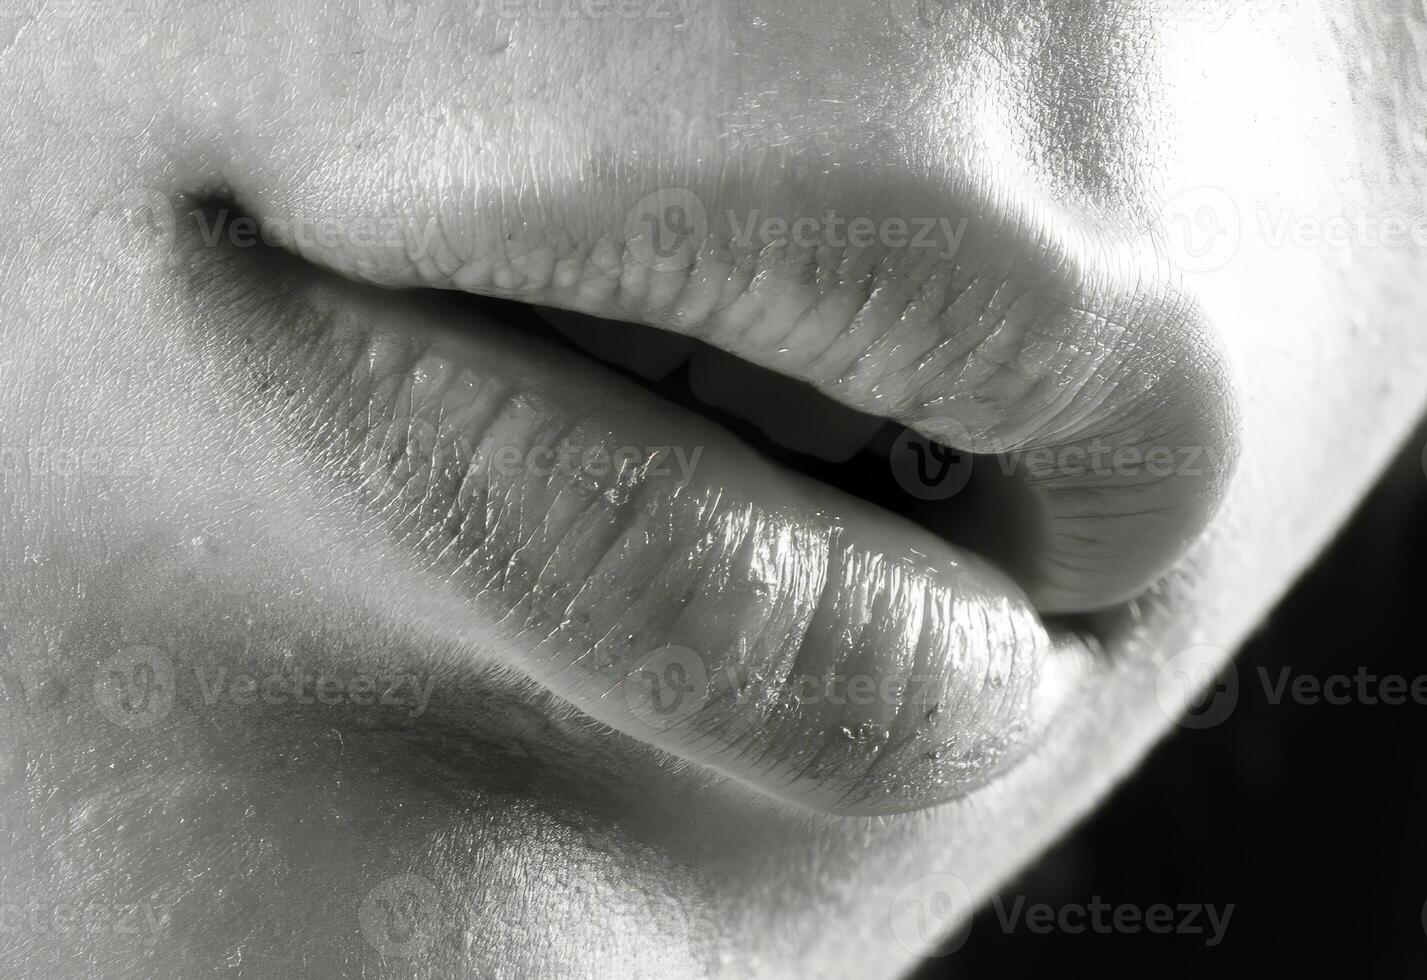 Sexy lips close view photo, female lips with lipstick closeup background, face detail portrait photo